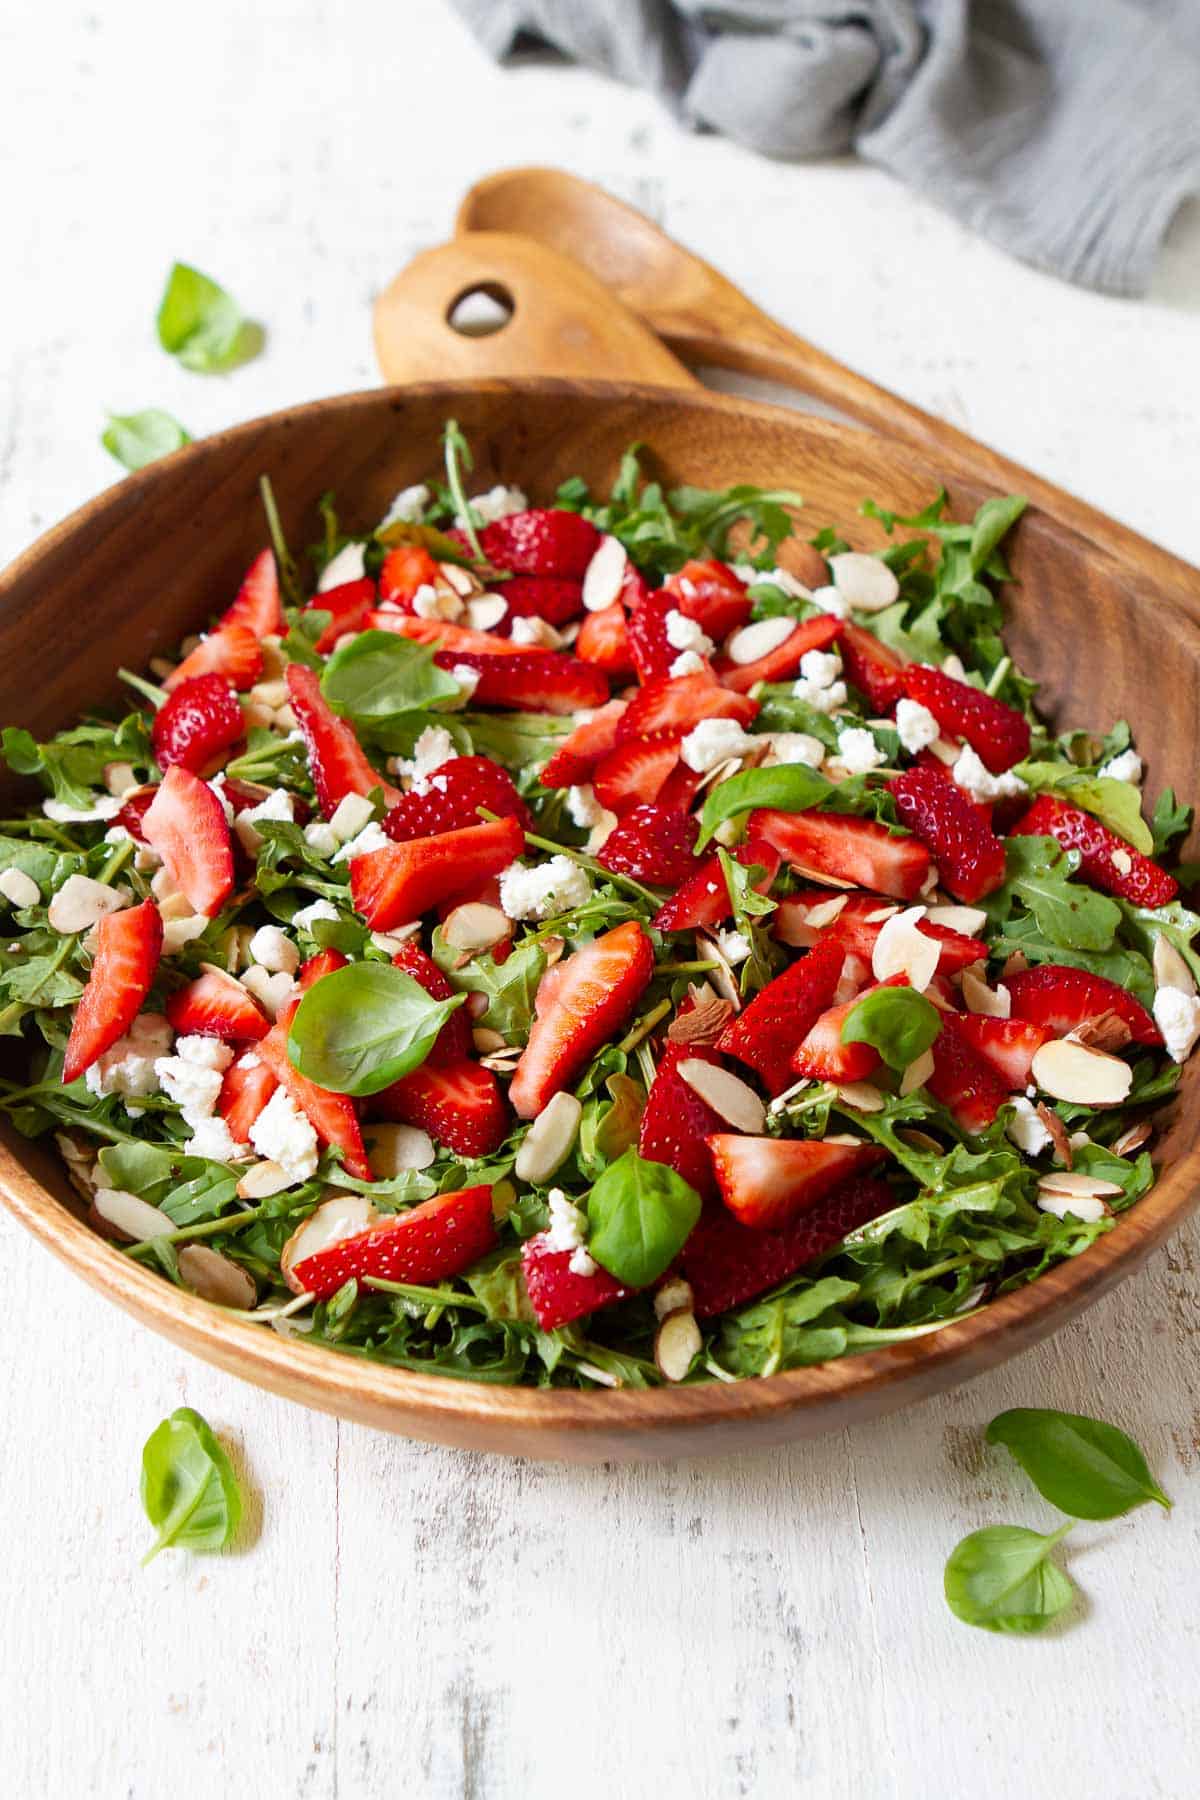 Arugula salad in a wooden salad bowl, with strawberries and cheese.